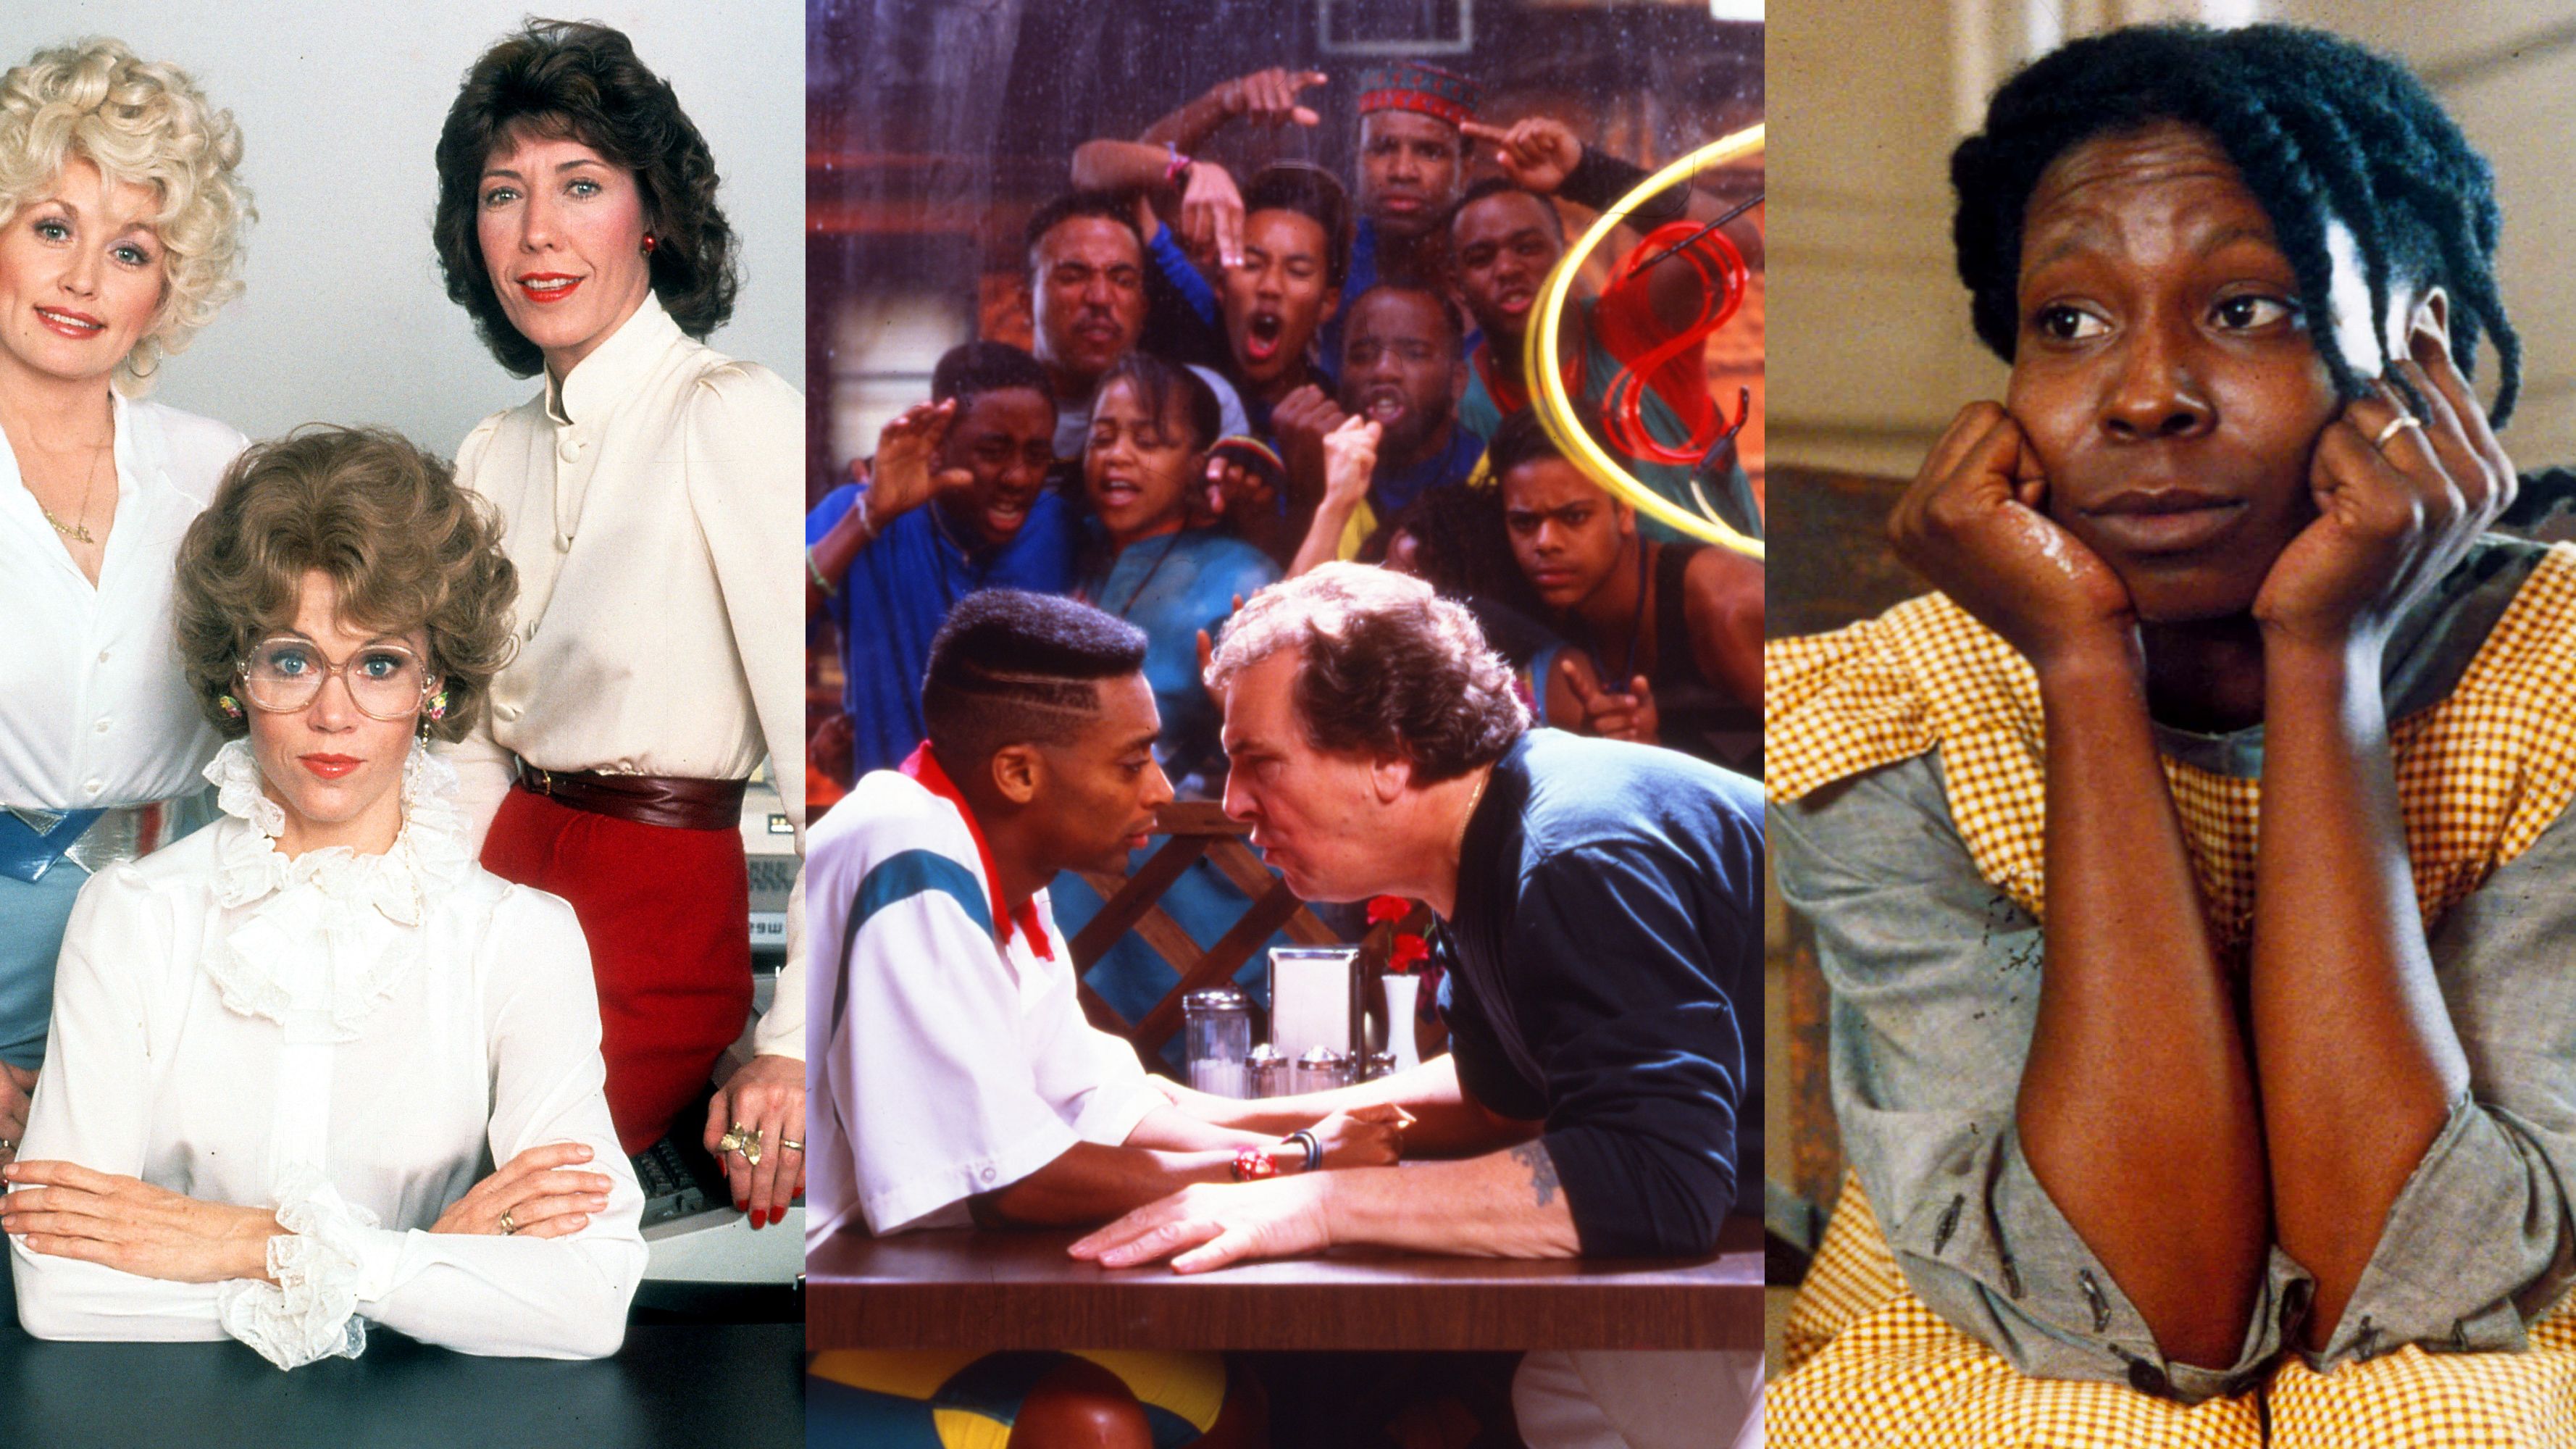 One Girl 50 Men Pron - The 50 Best '80s Movies, Ranked | Marie Claire